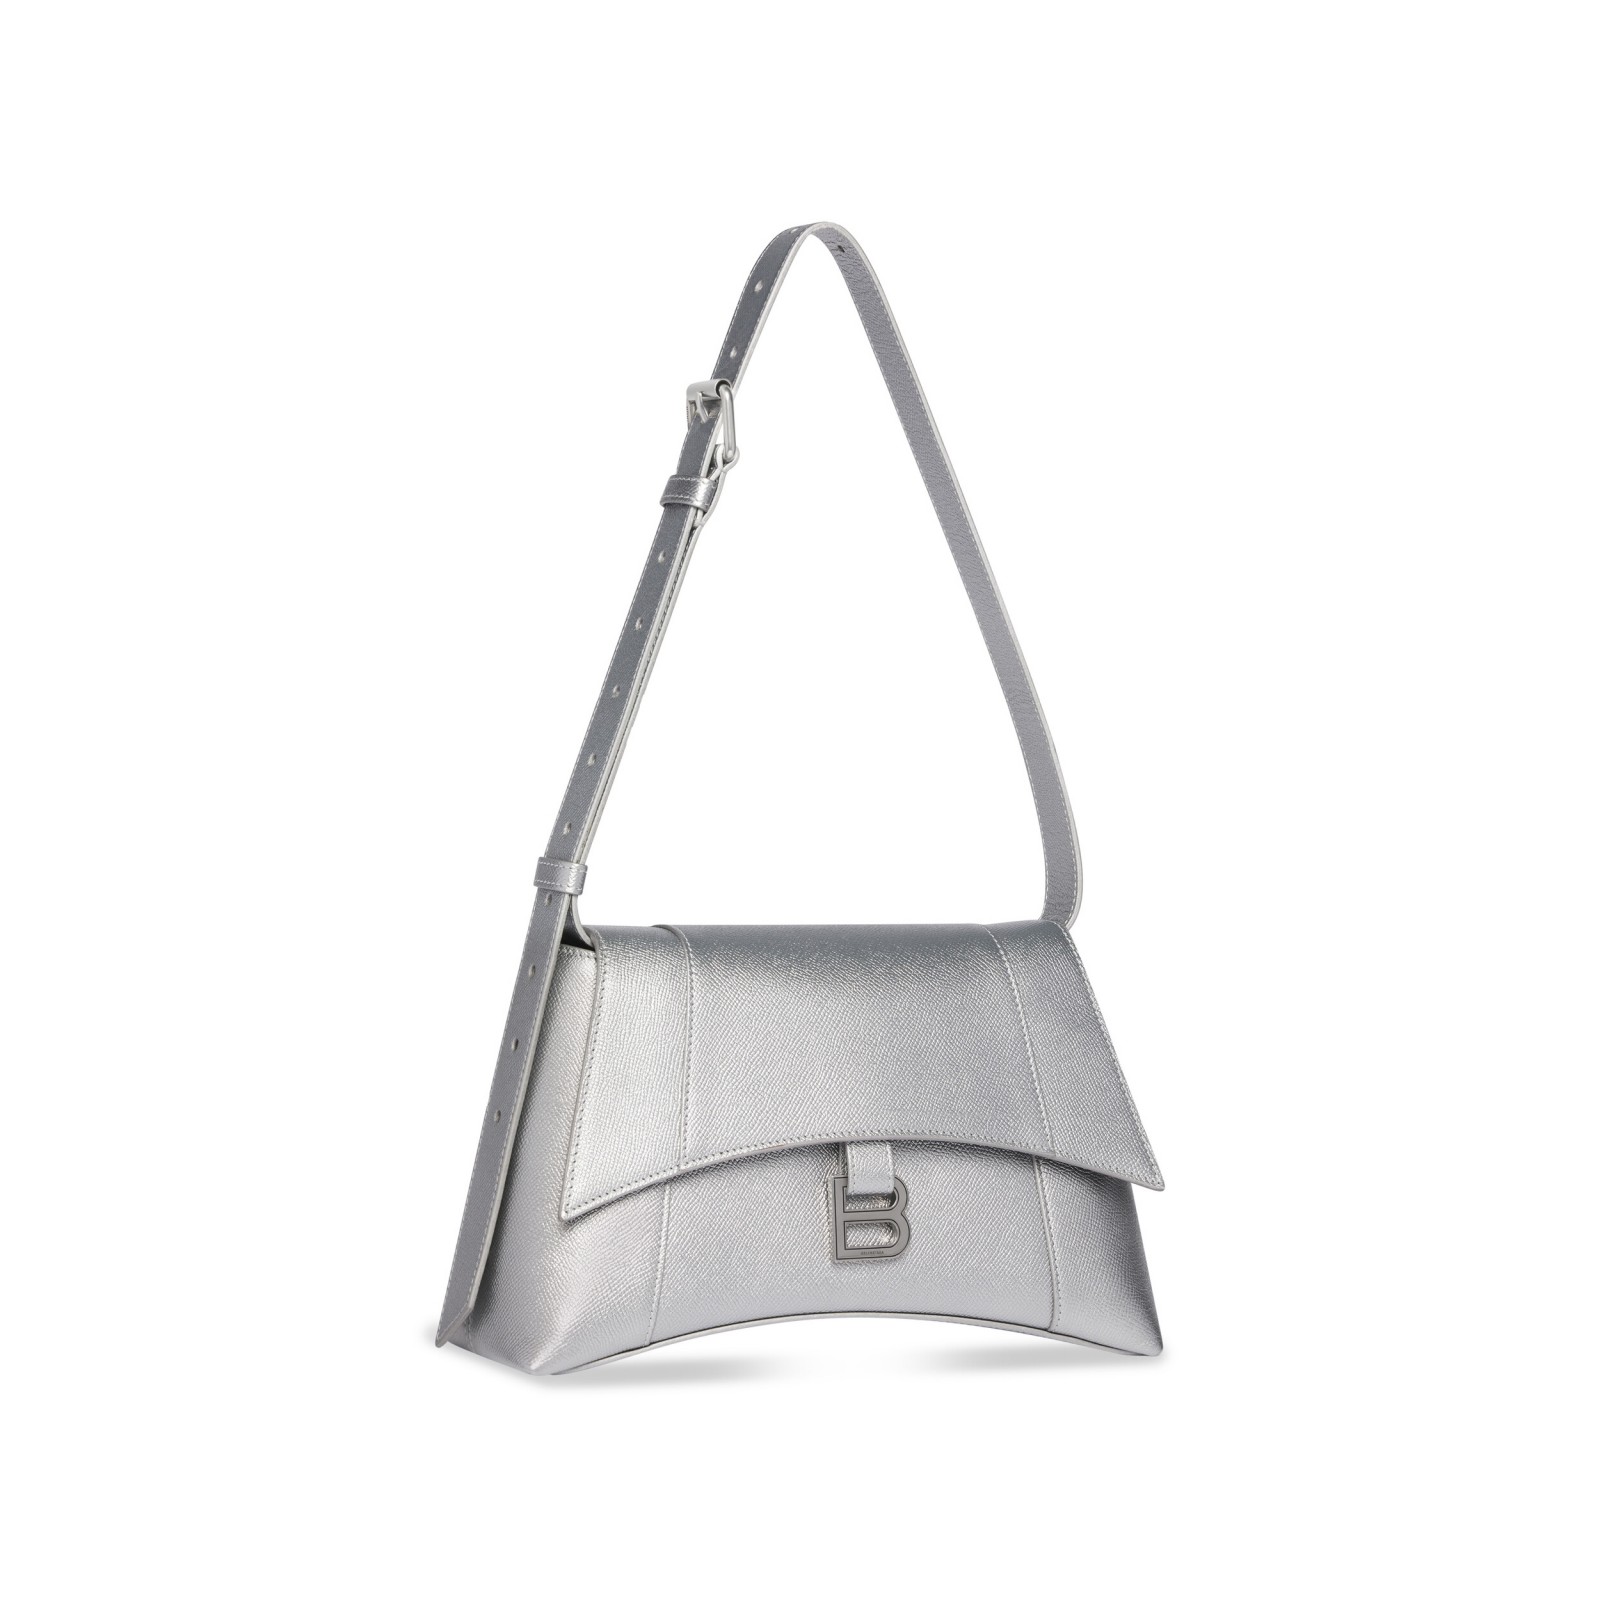 DOWNTOWN SMALL SHOULDER BAG METALLIZED